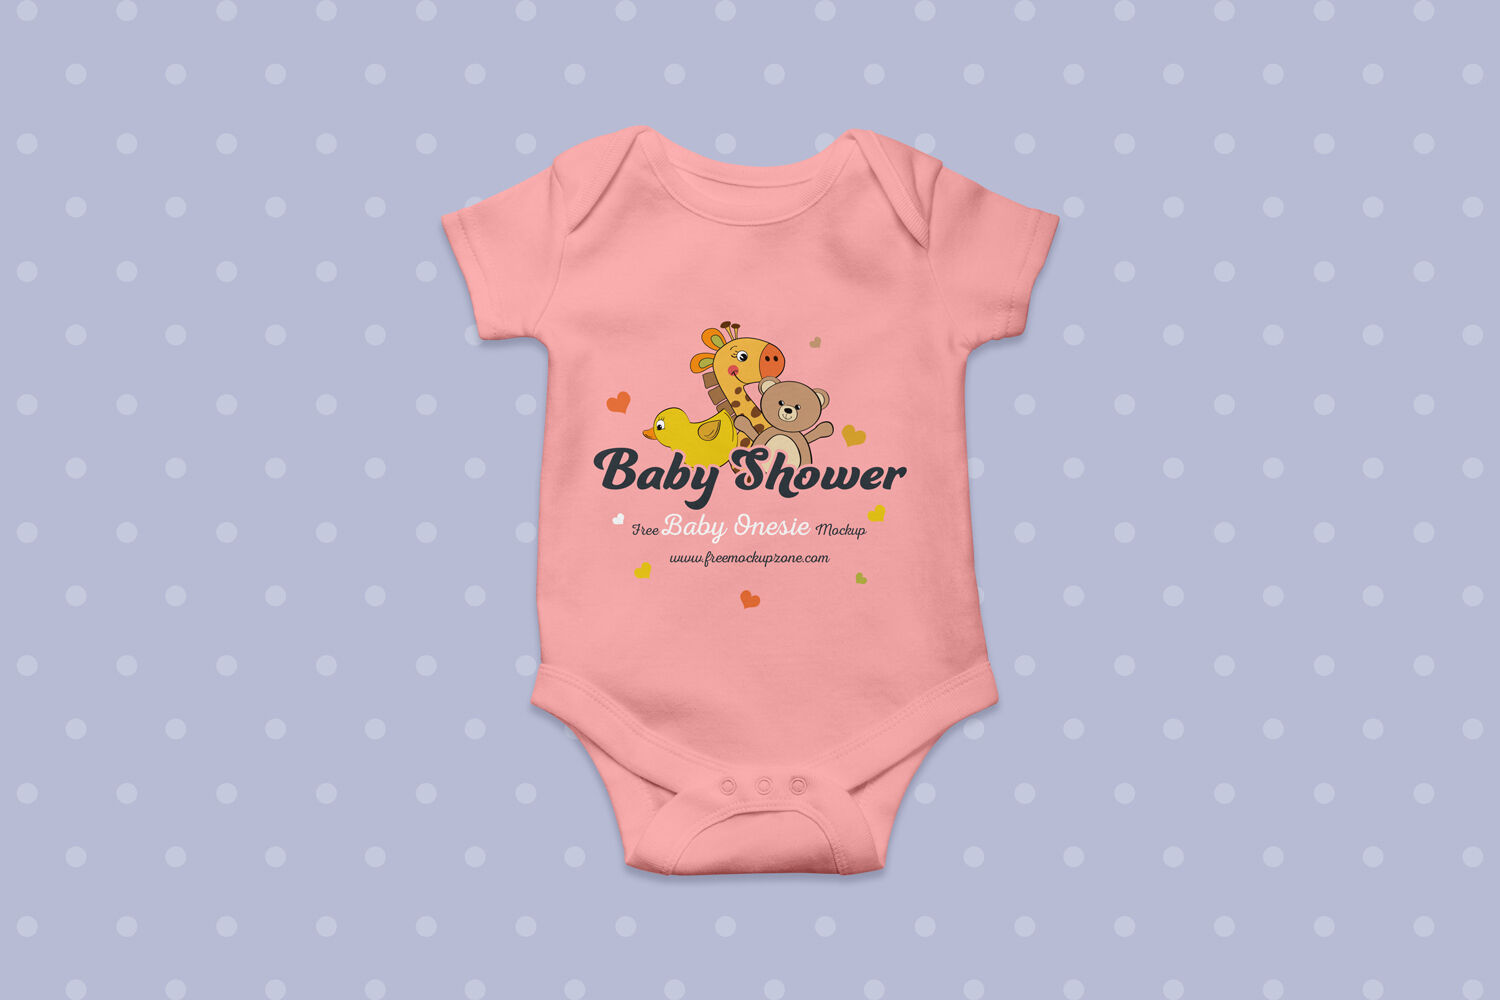 Top View Baby Suit Laying Down Mockup FREE PSD